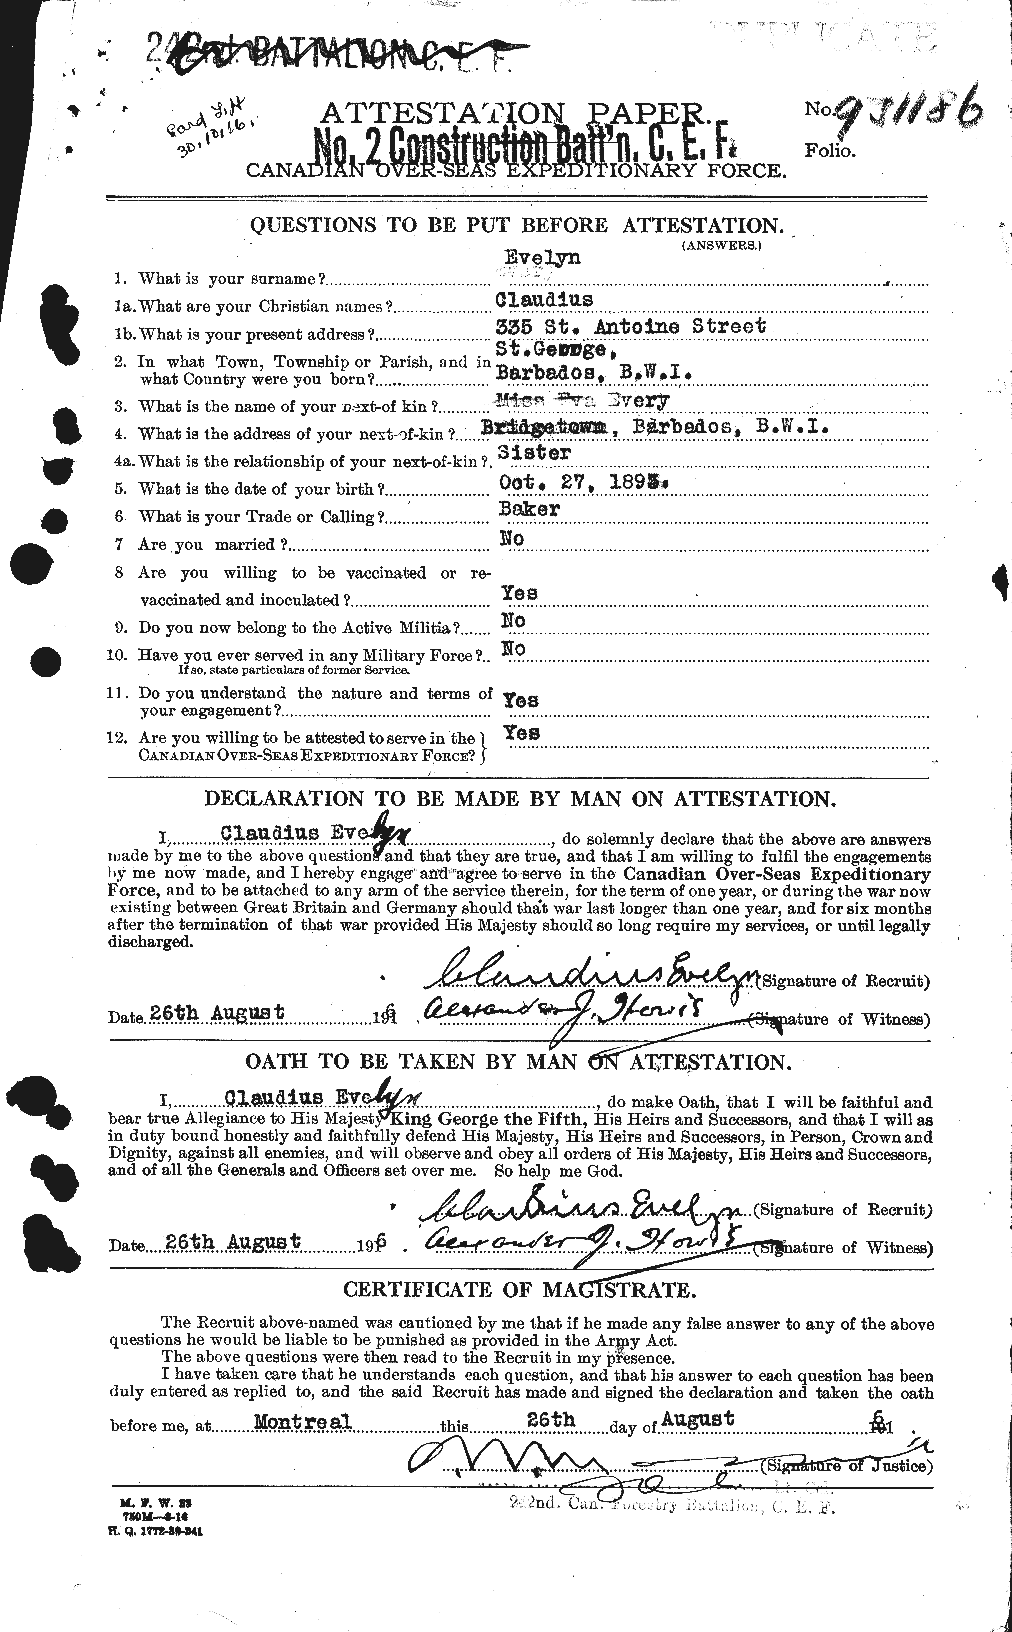 Personnel Records of the First World War - CEF 315717a